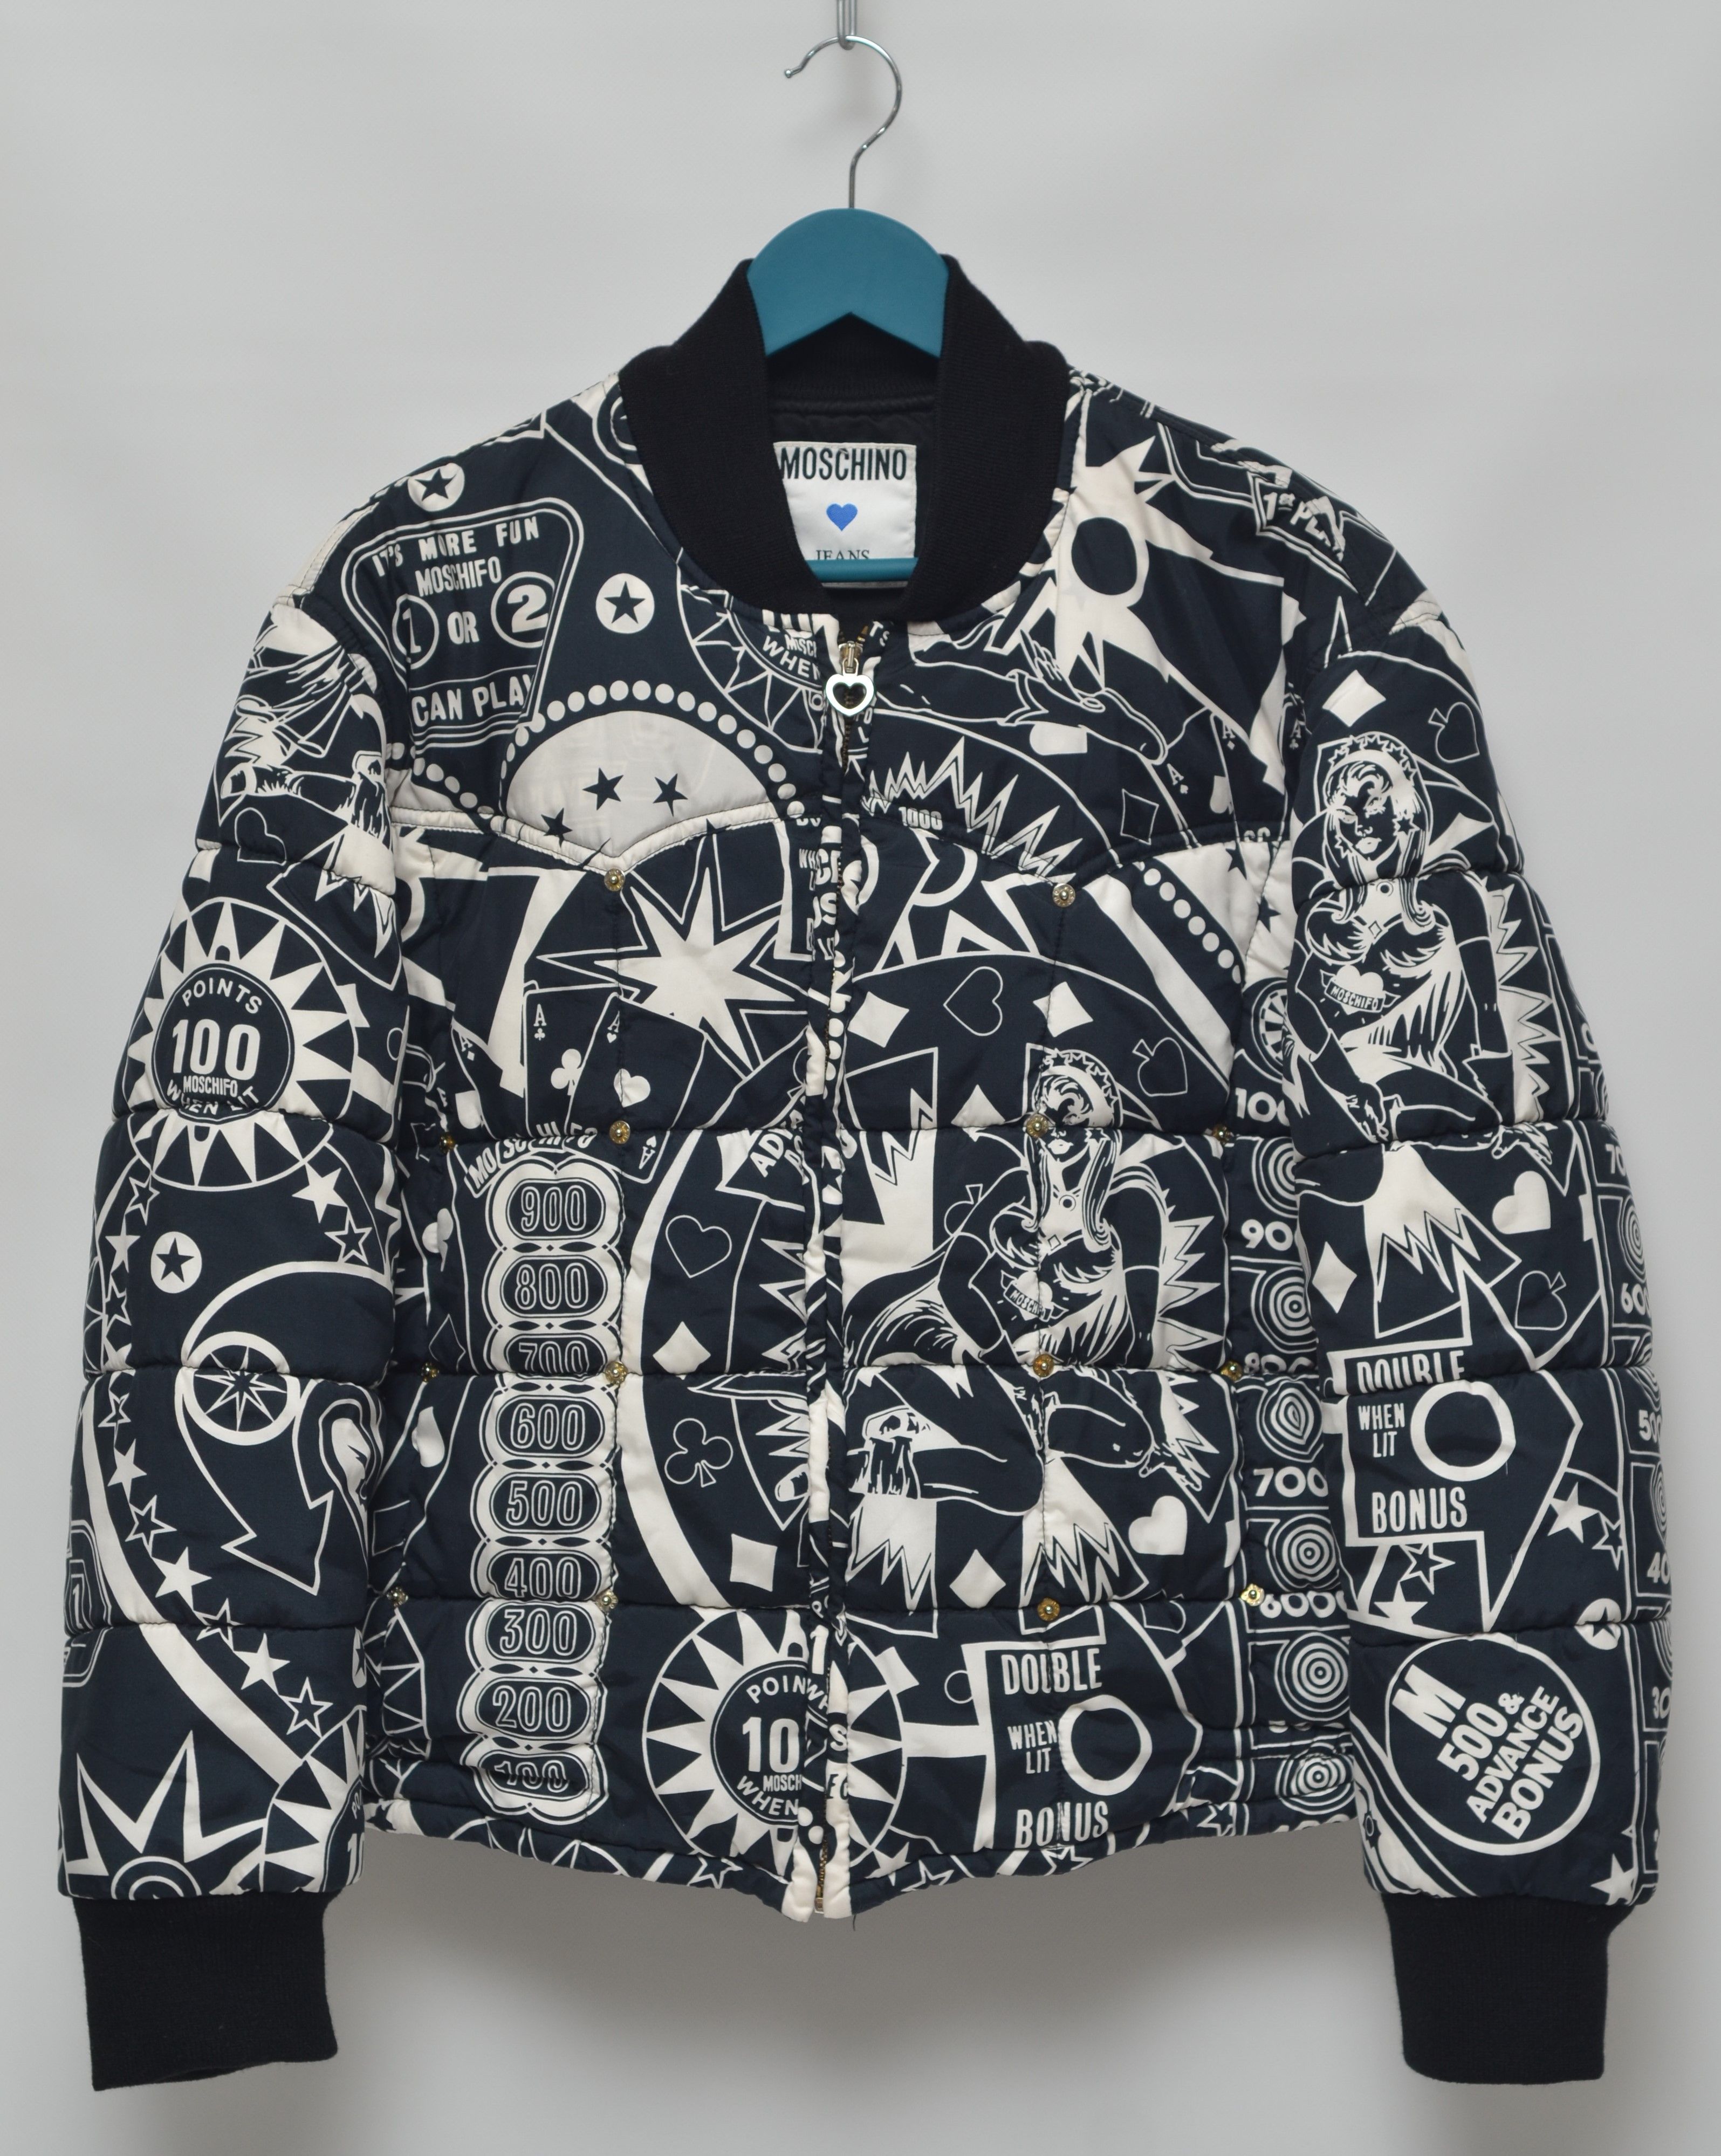 Moschino MOSCHINO Vintage Rare Pinball Bomber Jacket Made in Italy Size US M / EU 48-50 / 2 - 1 Preview